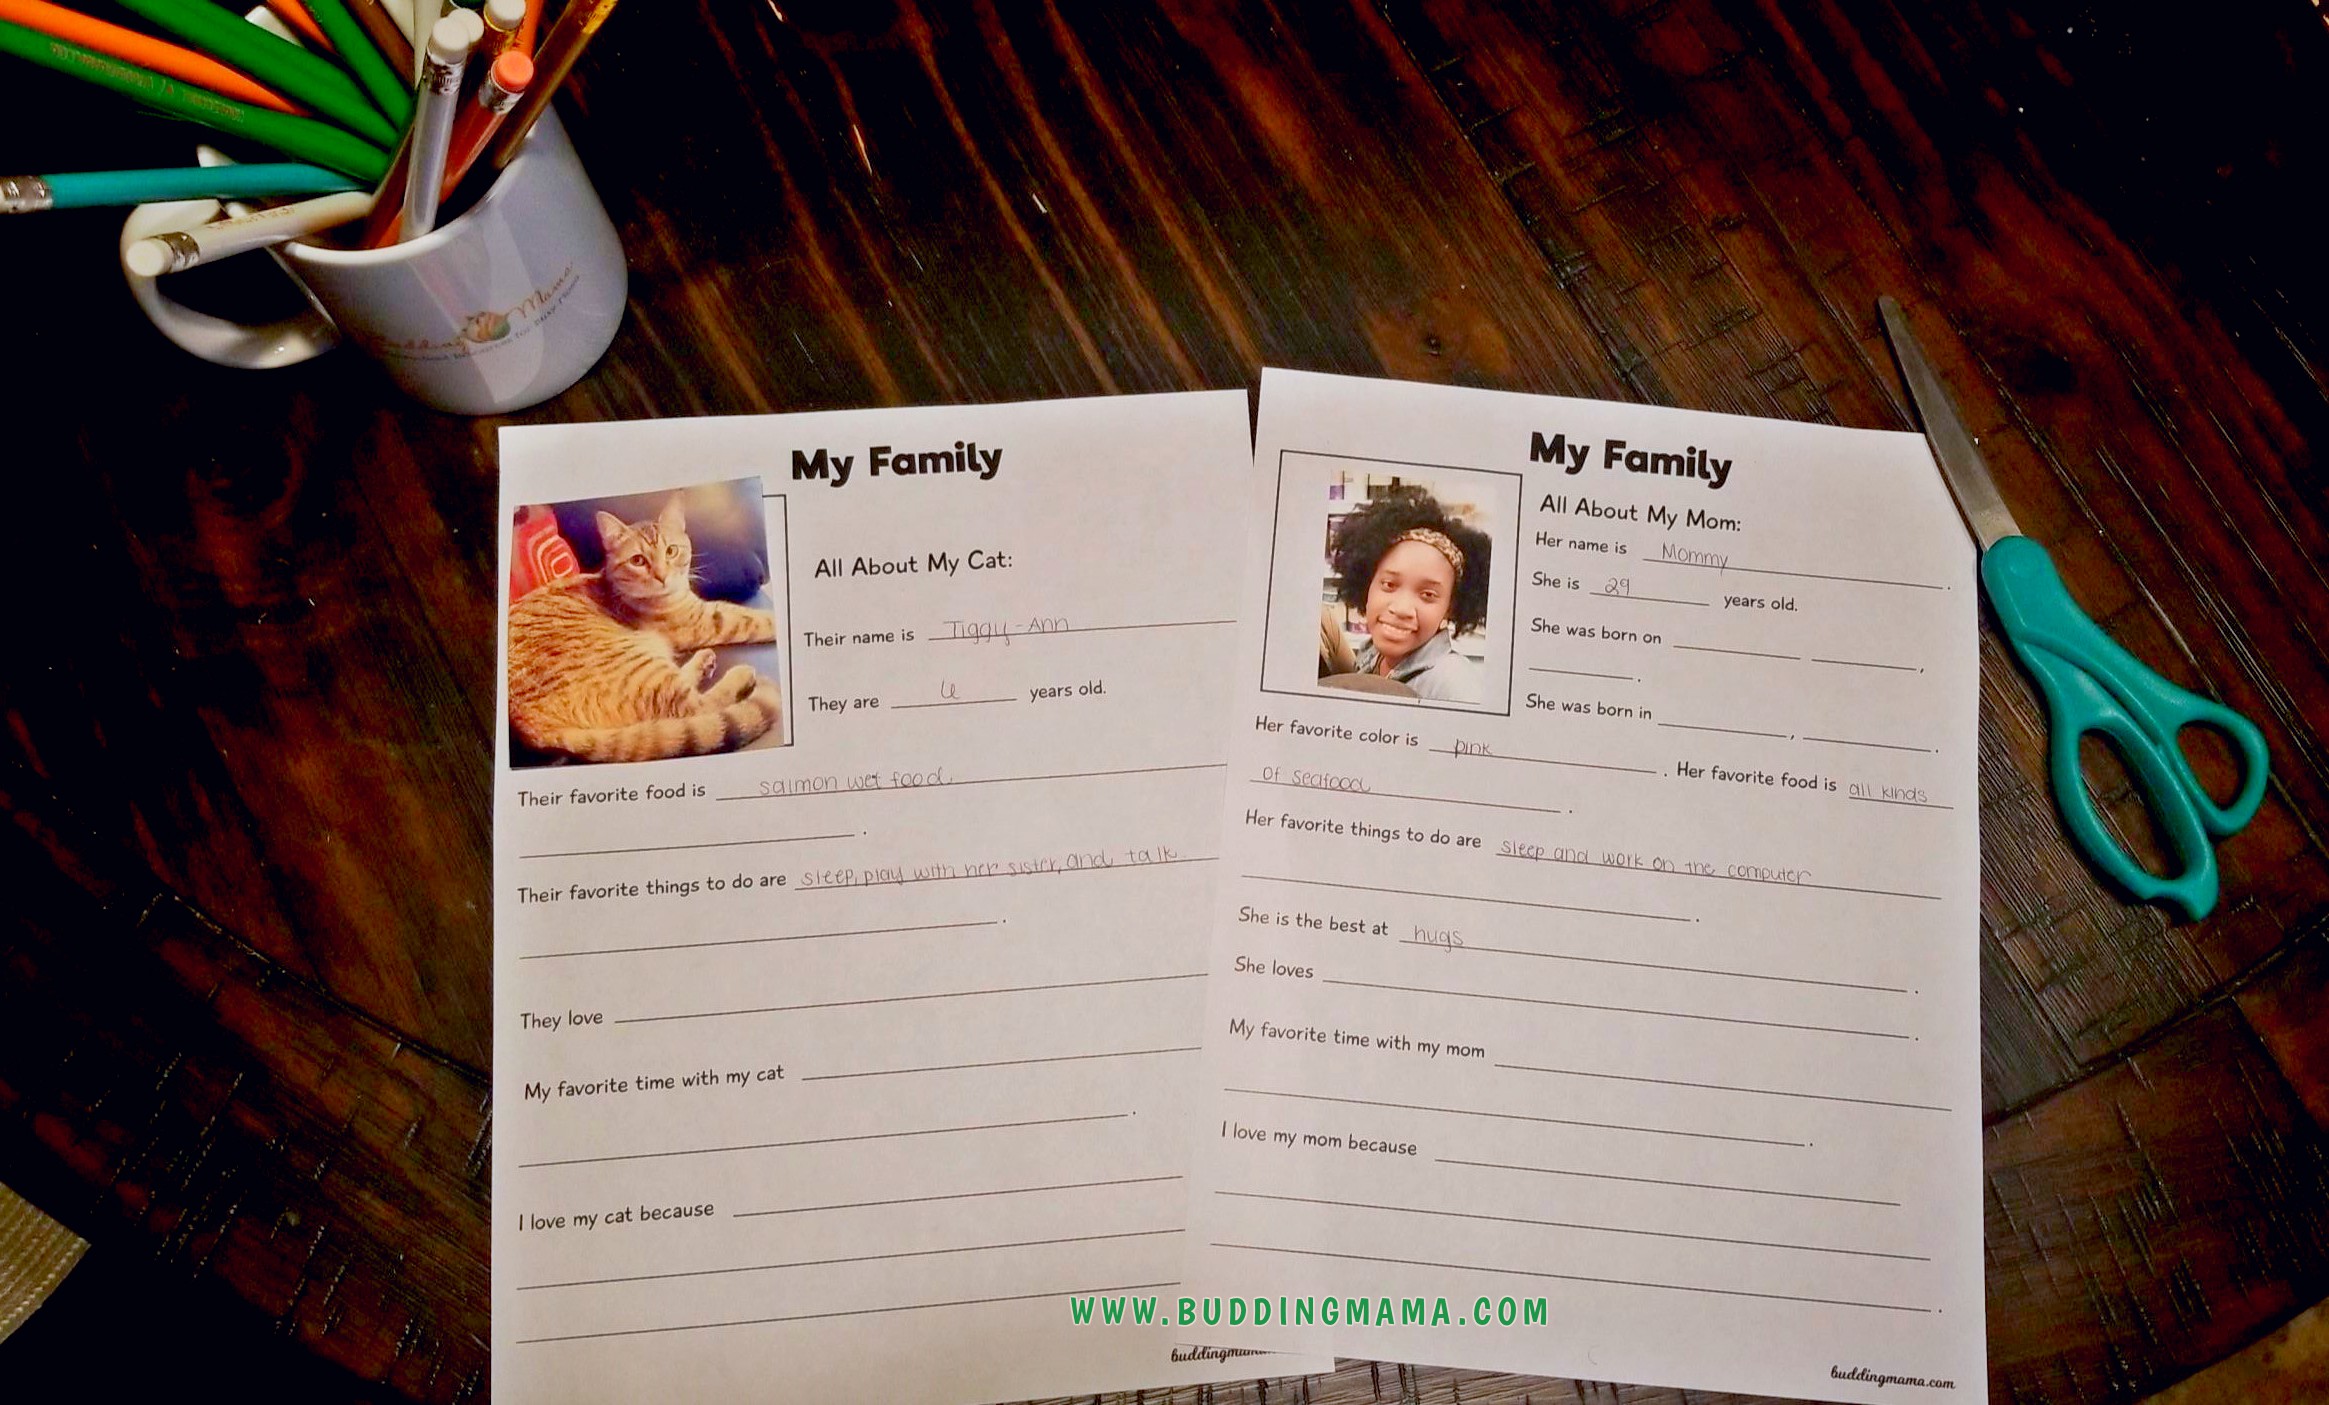 all about my family activities for kids worksheets homeschool, family, dad, daughter, sister, worksheets, black and white background, free download